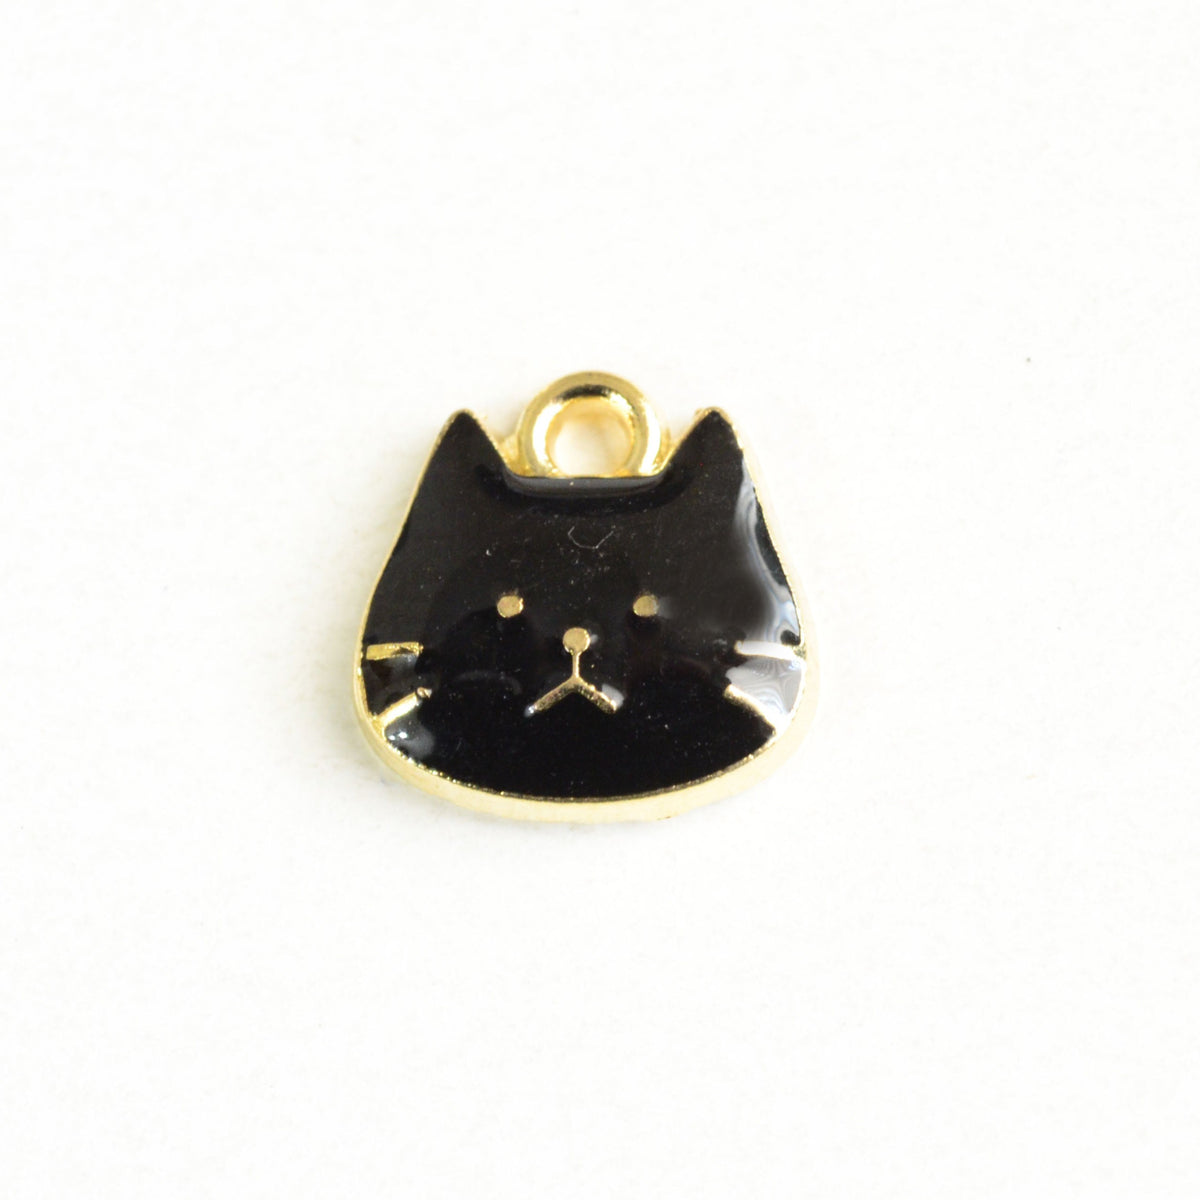 Cow Charms, Black White Enamel, Gold Toned Alloy Metal, 16mm x 20mm - –  Paper Dog Supply Co